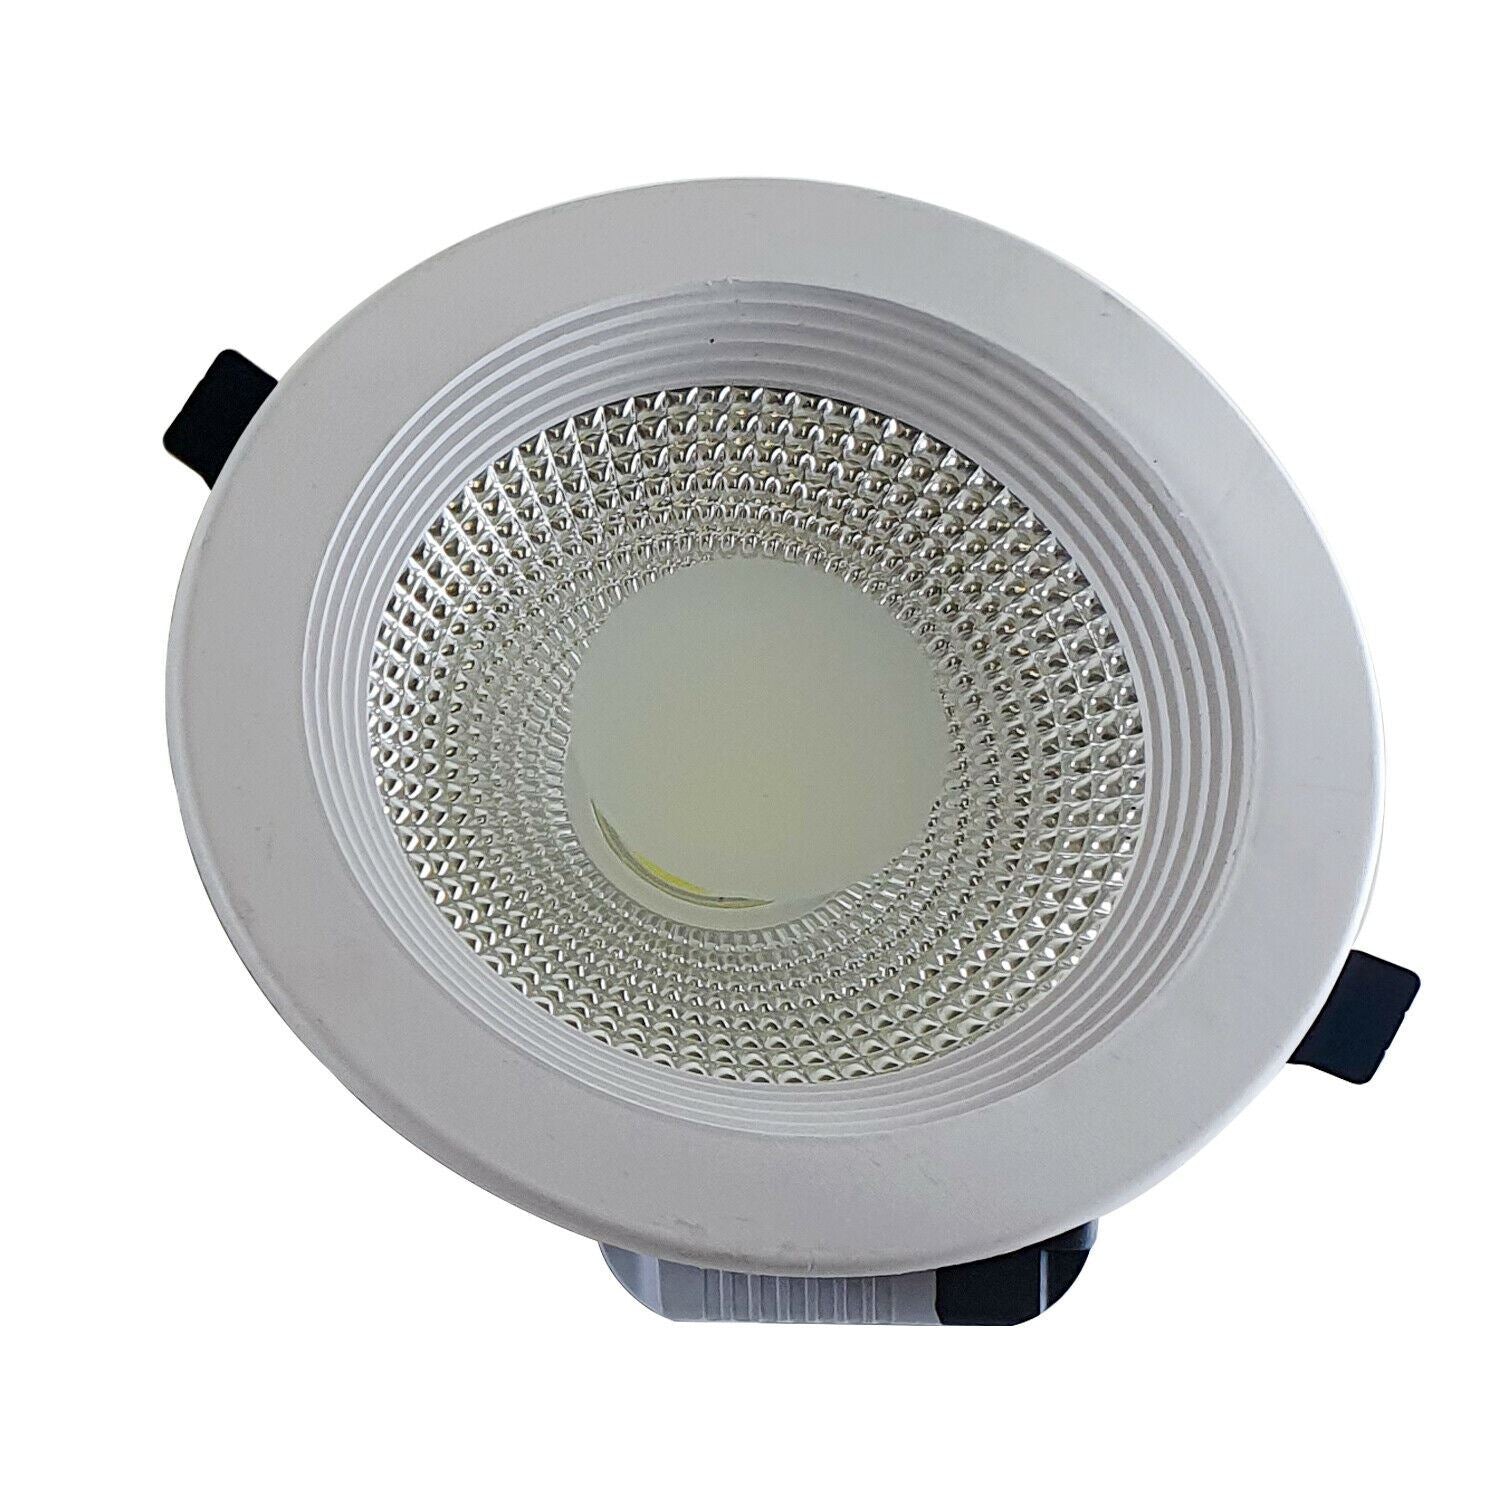 LED Round Recessed Indoor Ceiling Panel down Light Cool White For Hotel, Office, Library, Cellar~1311 - LEDSone UK Ltd